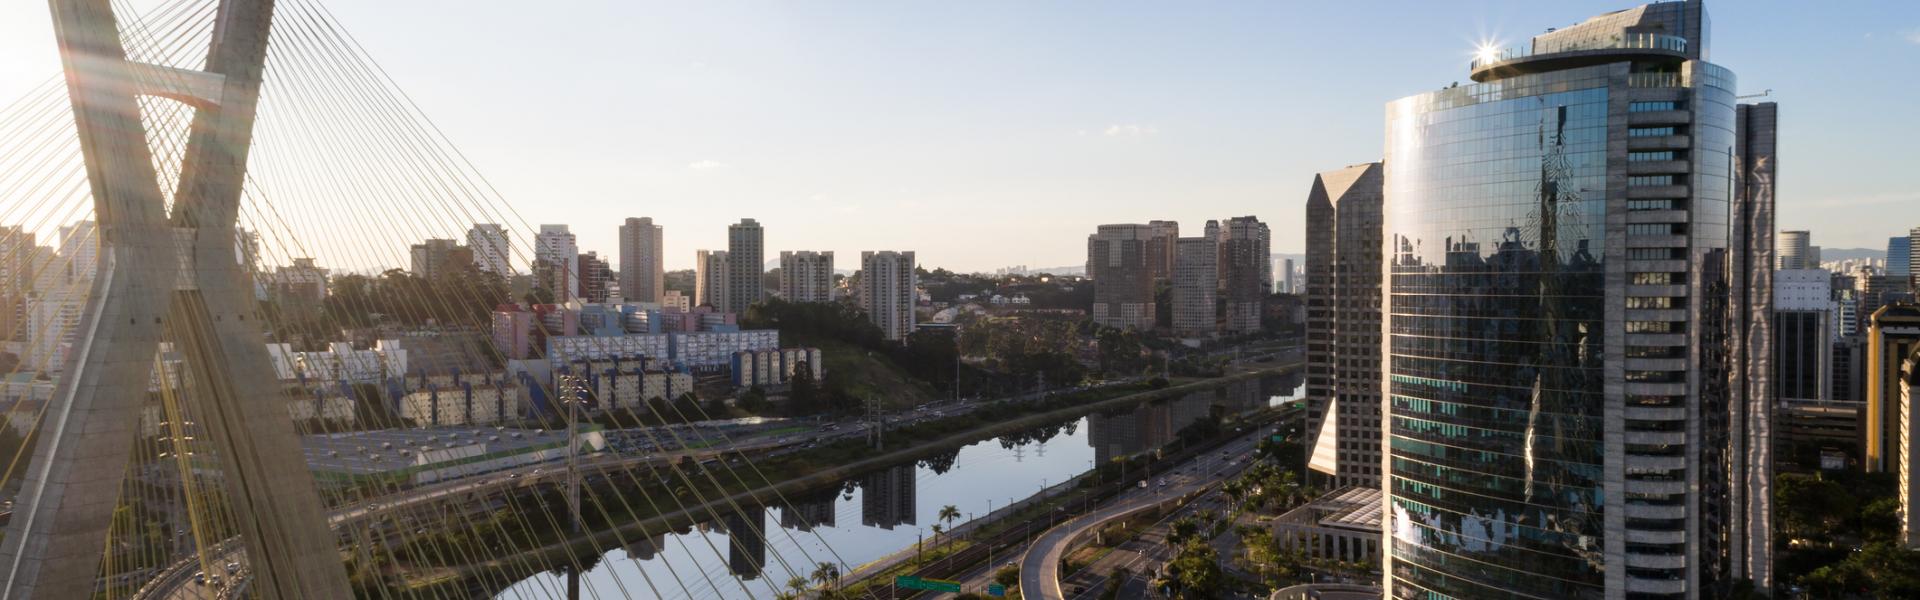 Holiday lettings & accommodation in Sao Paulo - HomeToGo